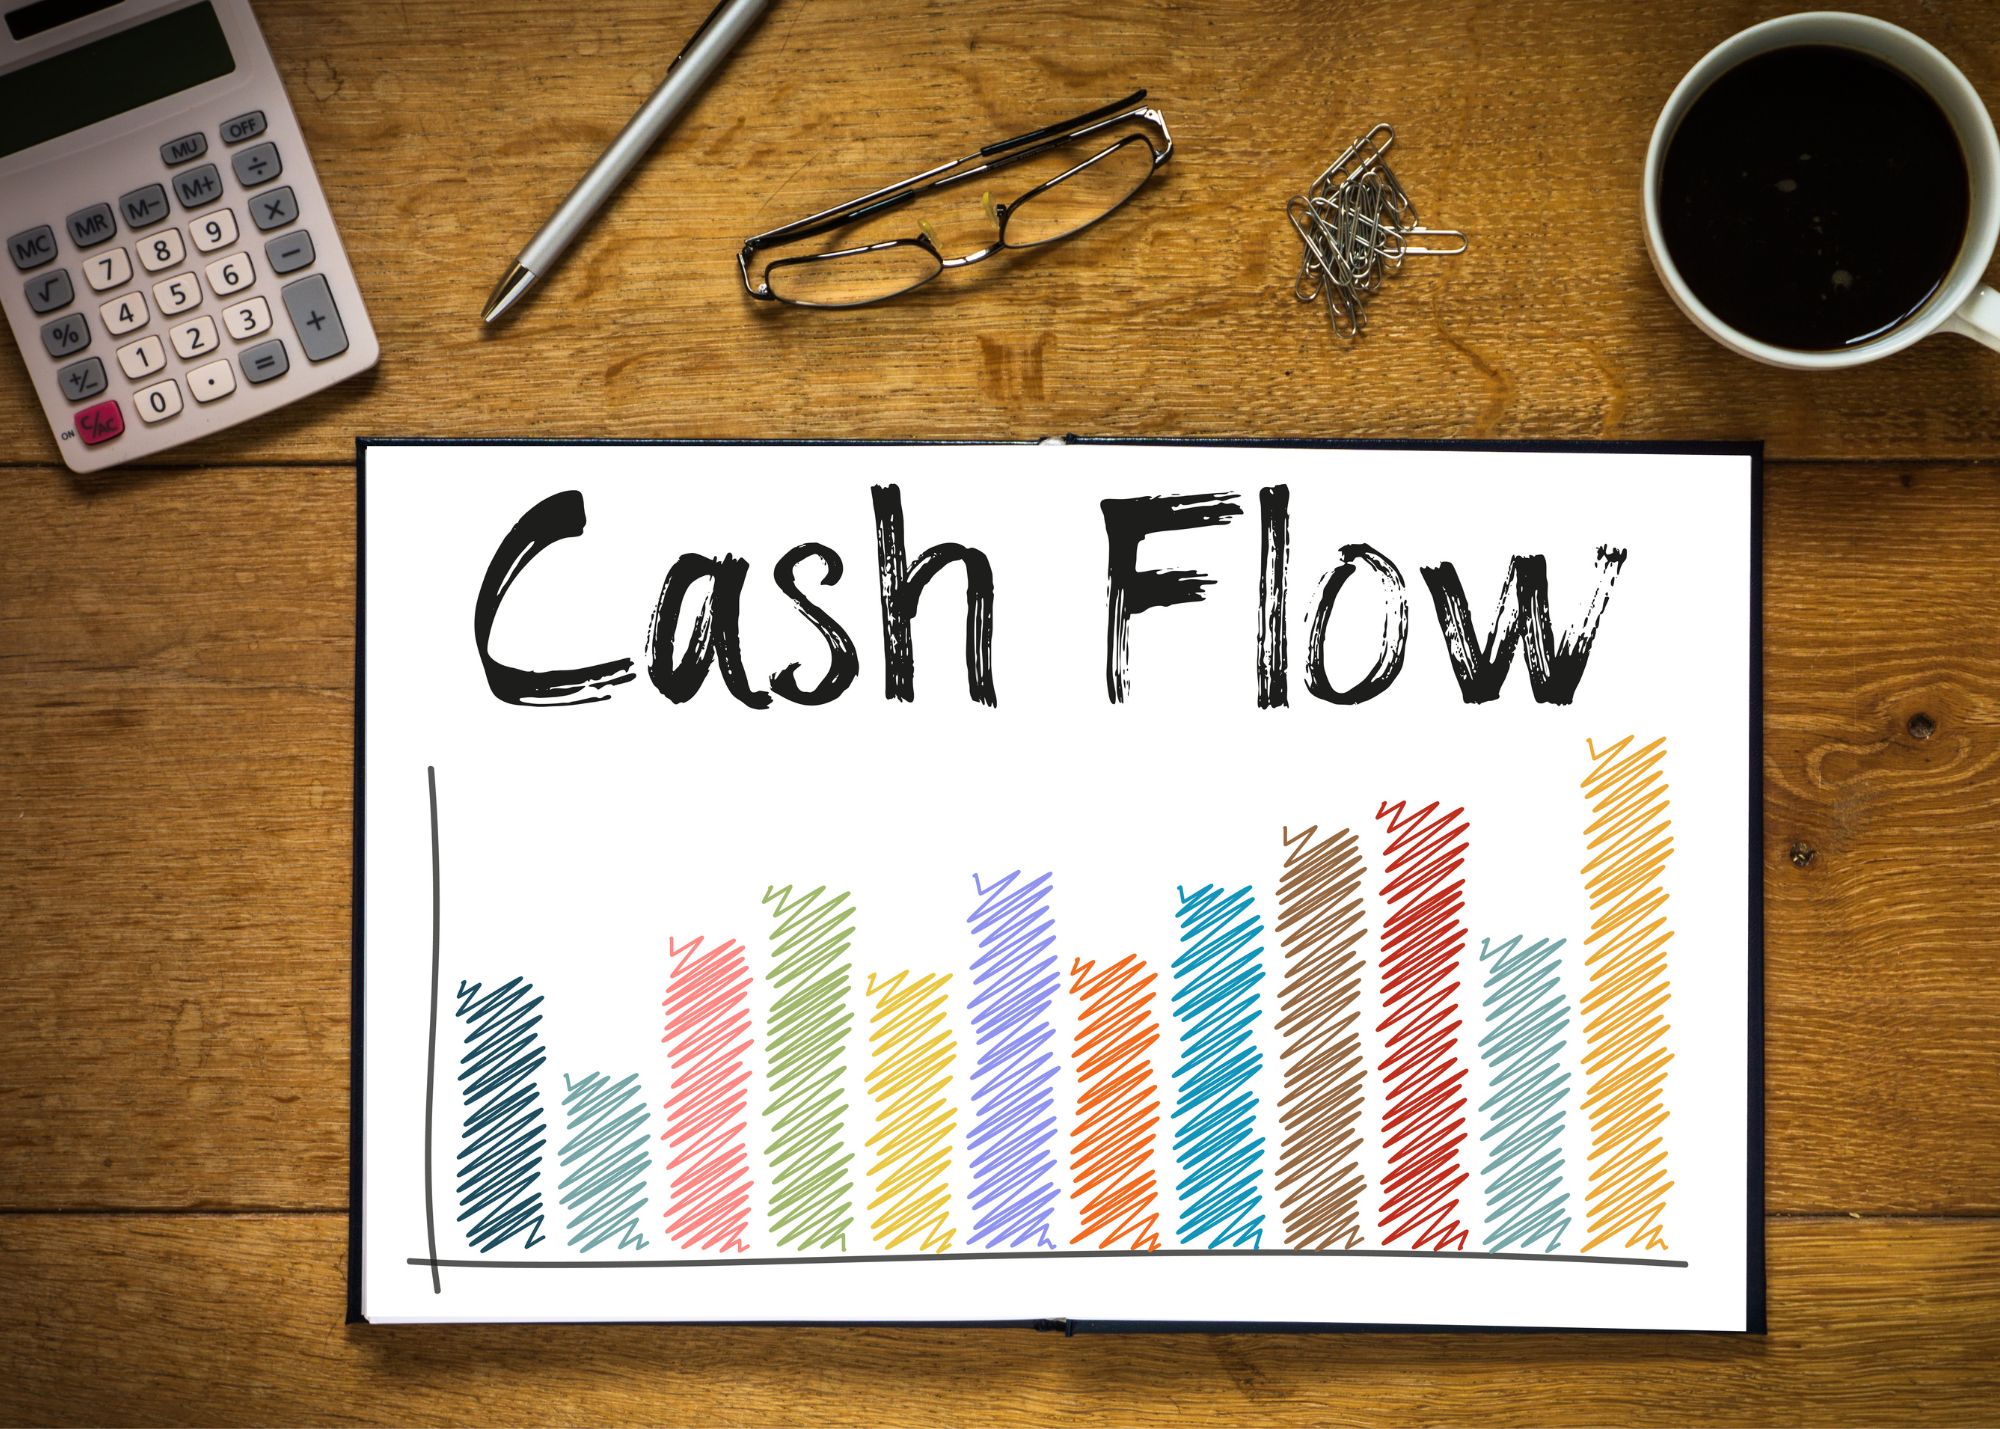 Market Commentary: 19 Stocks with Ridiculous Cash Flows